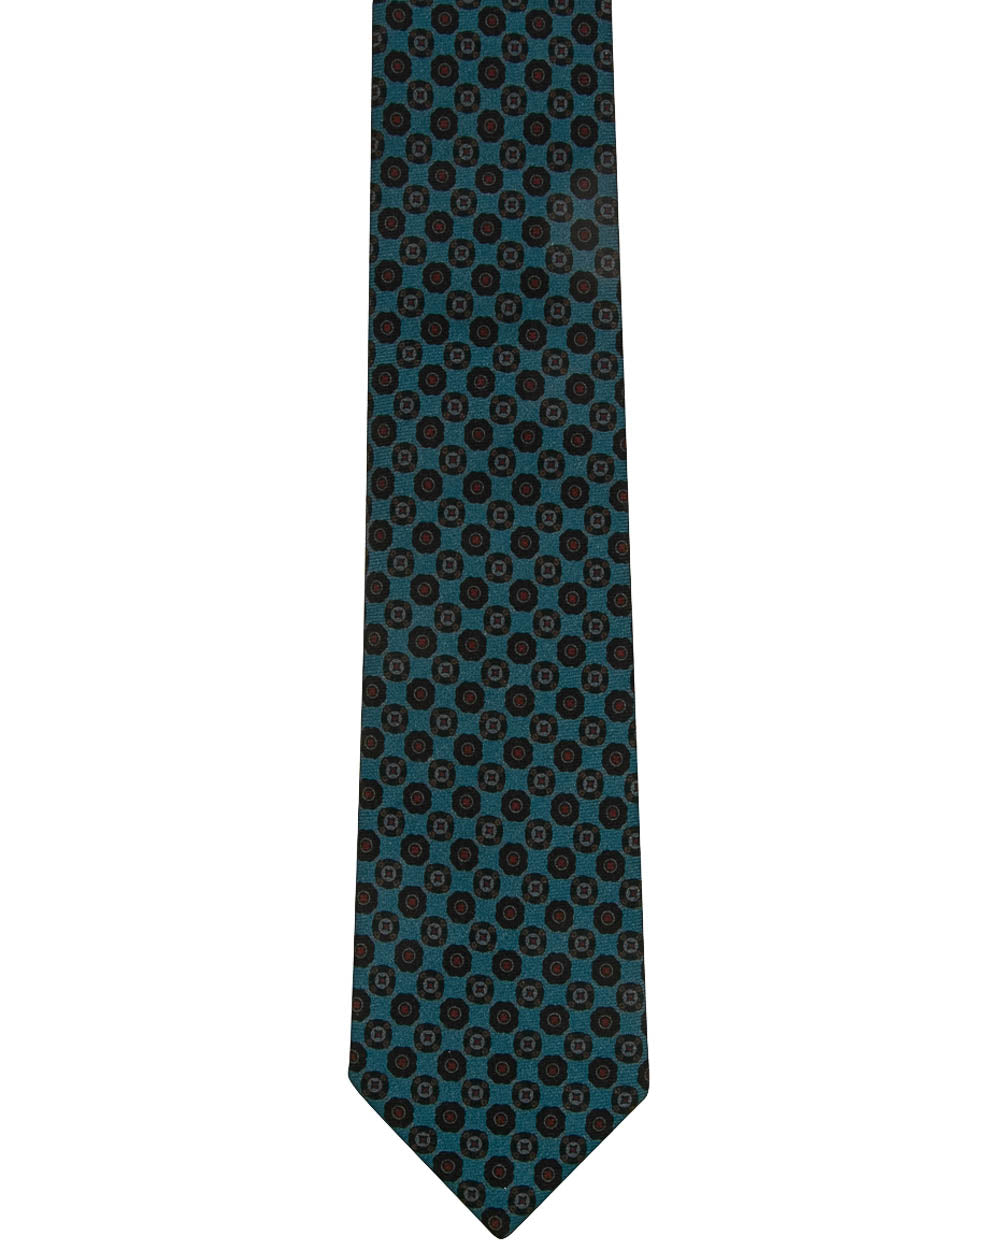 Teal with Navy and Red Medallion Tie